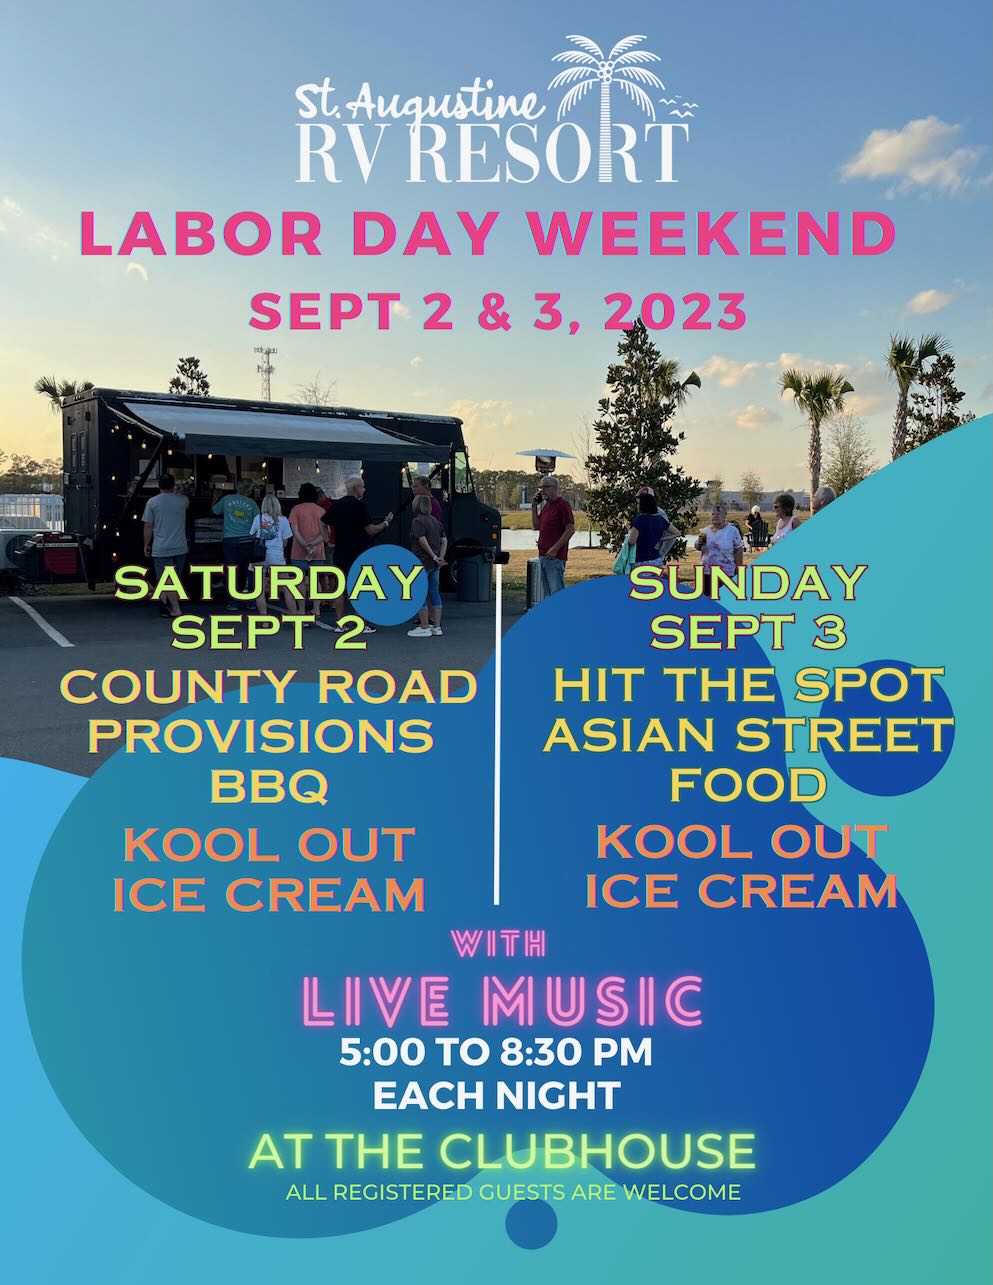 Things to Do this Labor Day Weekend